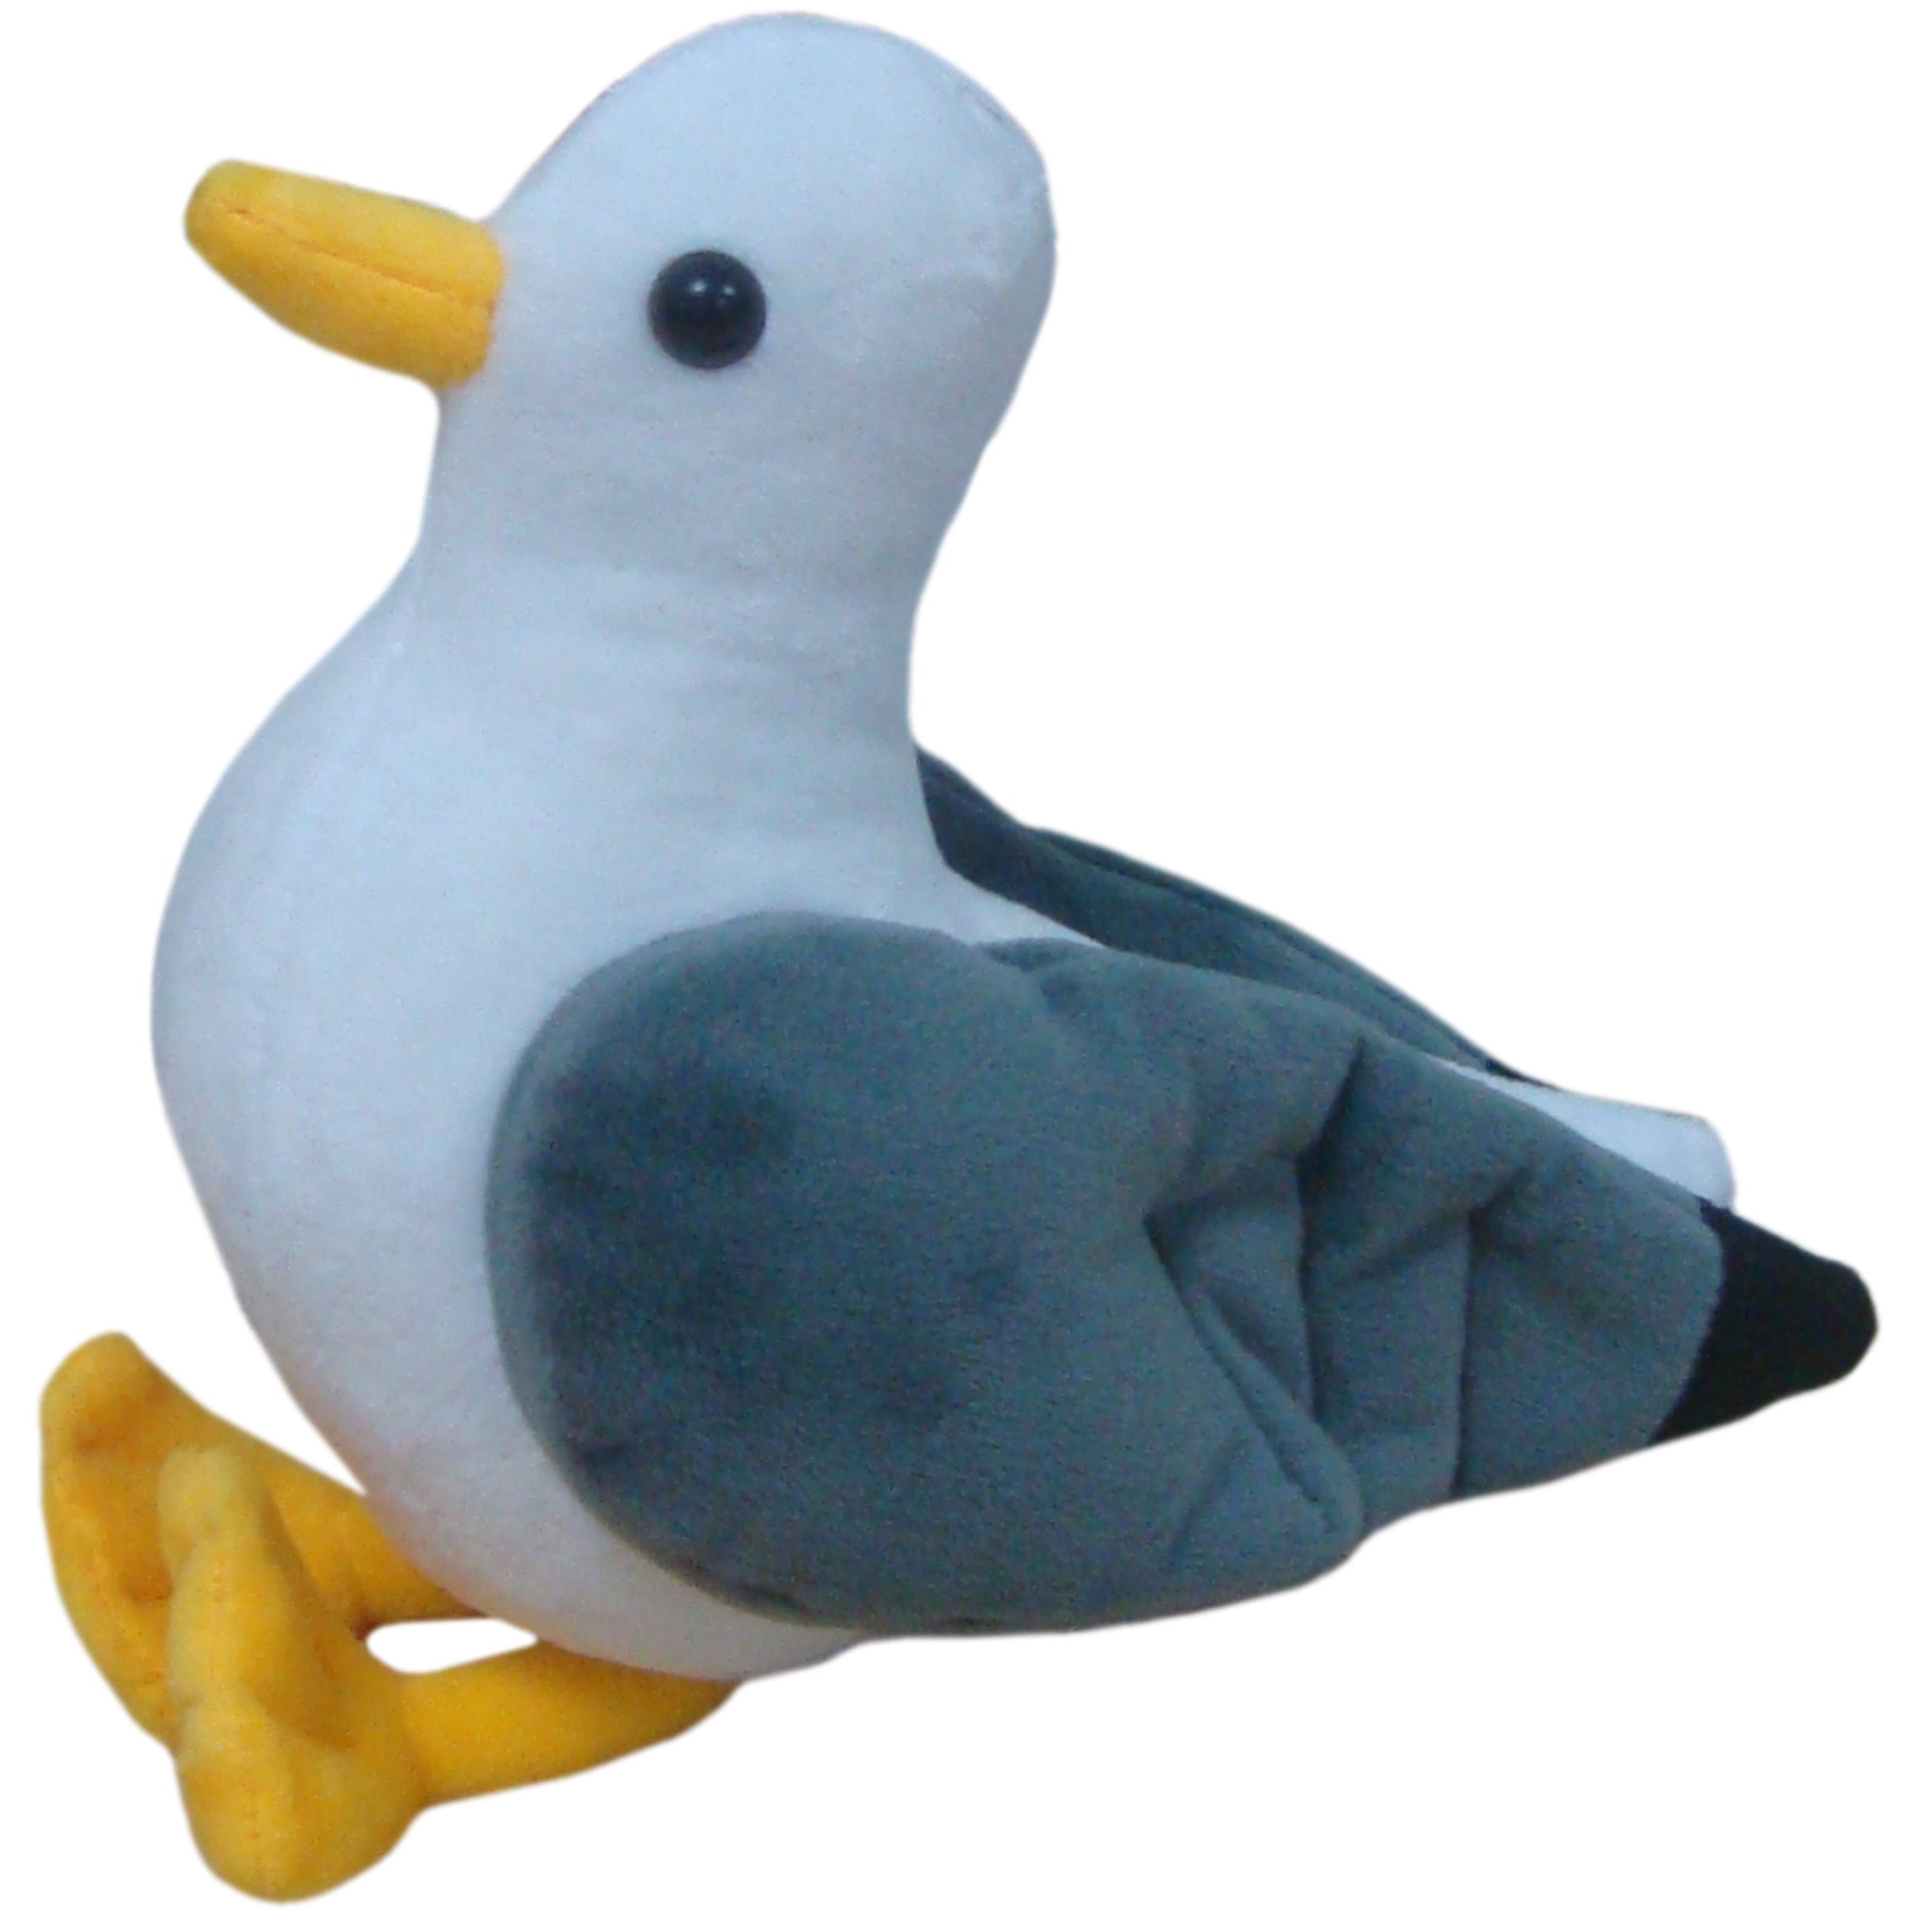 KandyToys Soft Toy Seagull with Sound 20cm